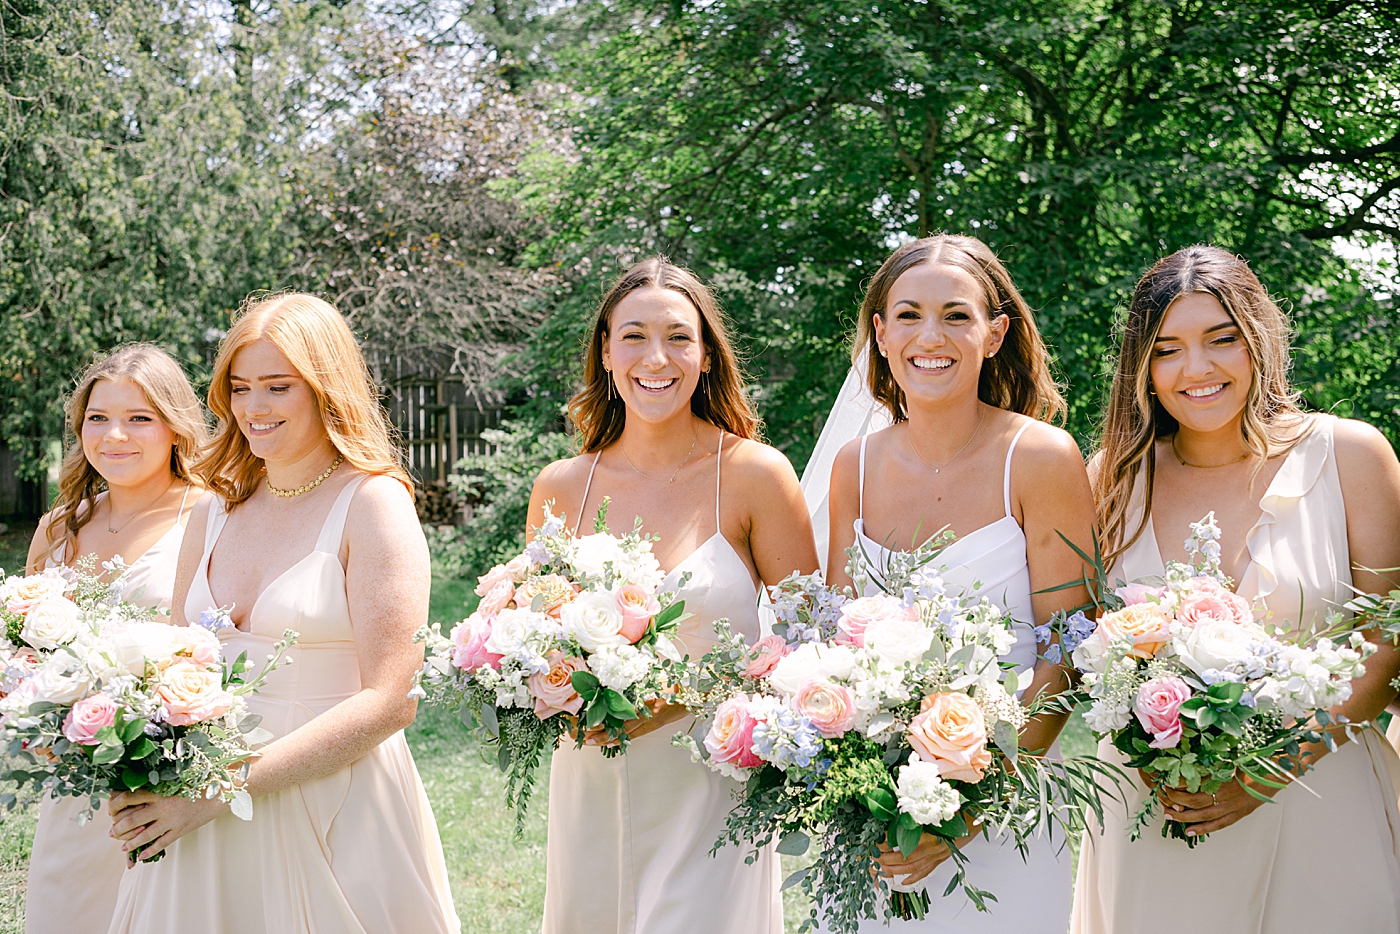 Bride walking with her bridesmaids | Image by Hope Helmuth Photography